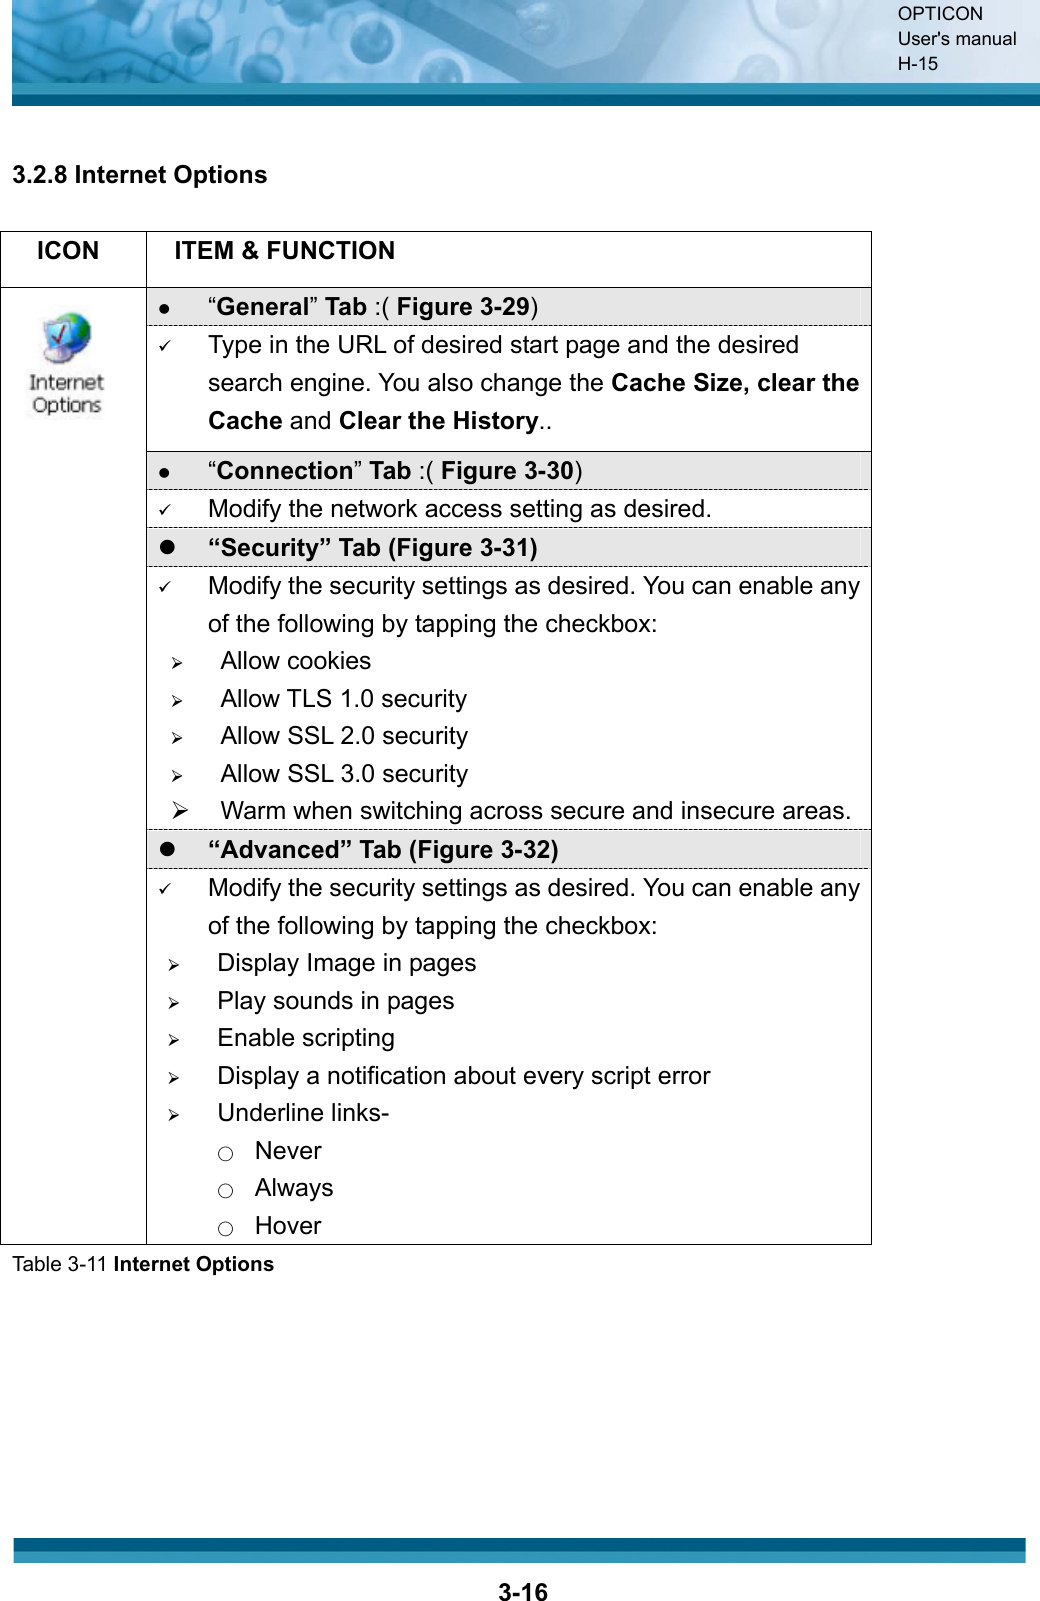 OPTICON User&apos;s manual H-153-163.2.8 Internet Options ICON ITEM &amp; FUNCTION z“General”Tab :( Figure 3-29)9Type in the URL of desired start page and the desired search engine. You also change the Cache Size, clear the Cache and Clear the History..z“Connection”Tab :( Figure 3-30)9Modify the network access setting as desired.z“Security” Tab (Figure 3-31)9Modify the security settings as desired. You can enable any of the following by tapping the checkbox:¾Allow cookies¾Allow TLS 1.0 security¾Allow SSL 2.0 security¾Allow SSL 3.0 security¾  Warm when switching across secure and insecure areas.z“Advanced” Tab (Figure 3-32)9Modify the security settings as desired. You can enable any of the following by tapping the checkbox:¾Display Image in pages¾Play sounds in pages¾Enable scripting¾Display a notification about every script error¾Underline links-Ϥʳ NeverϤʳ AlwaysϤʳ HoverTable 3-11 Internet Options